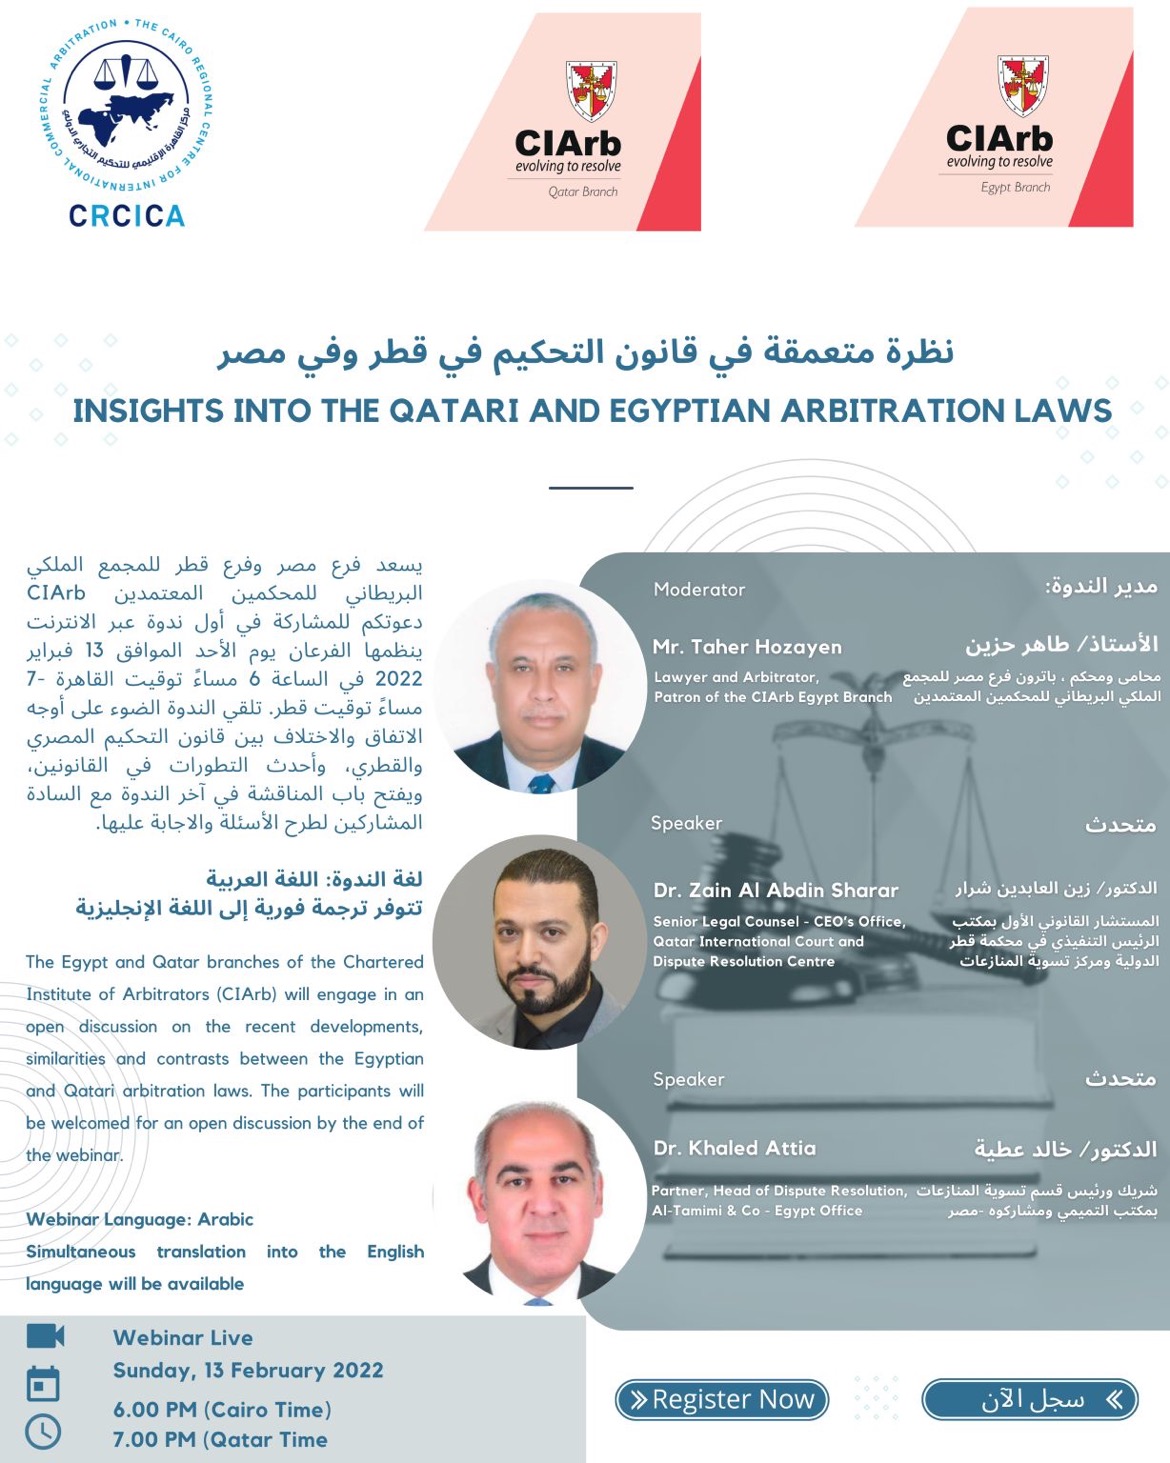 Insights into the Recent Developments of Qatari and Egyptian Arbitration Laws